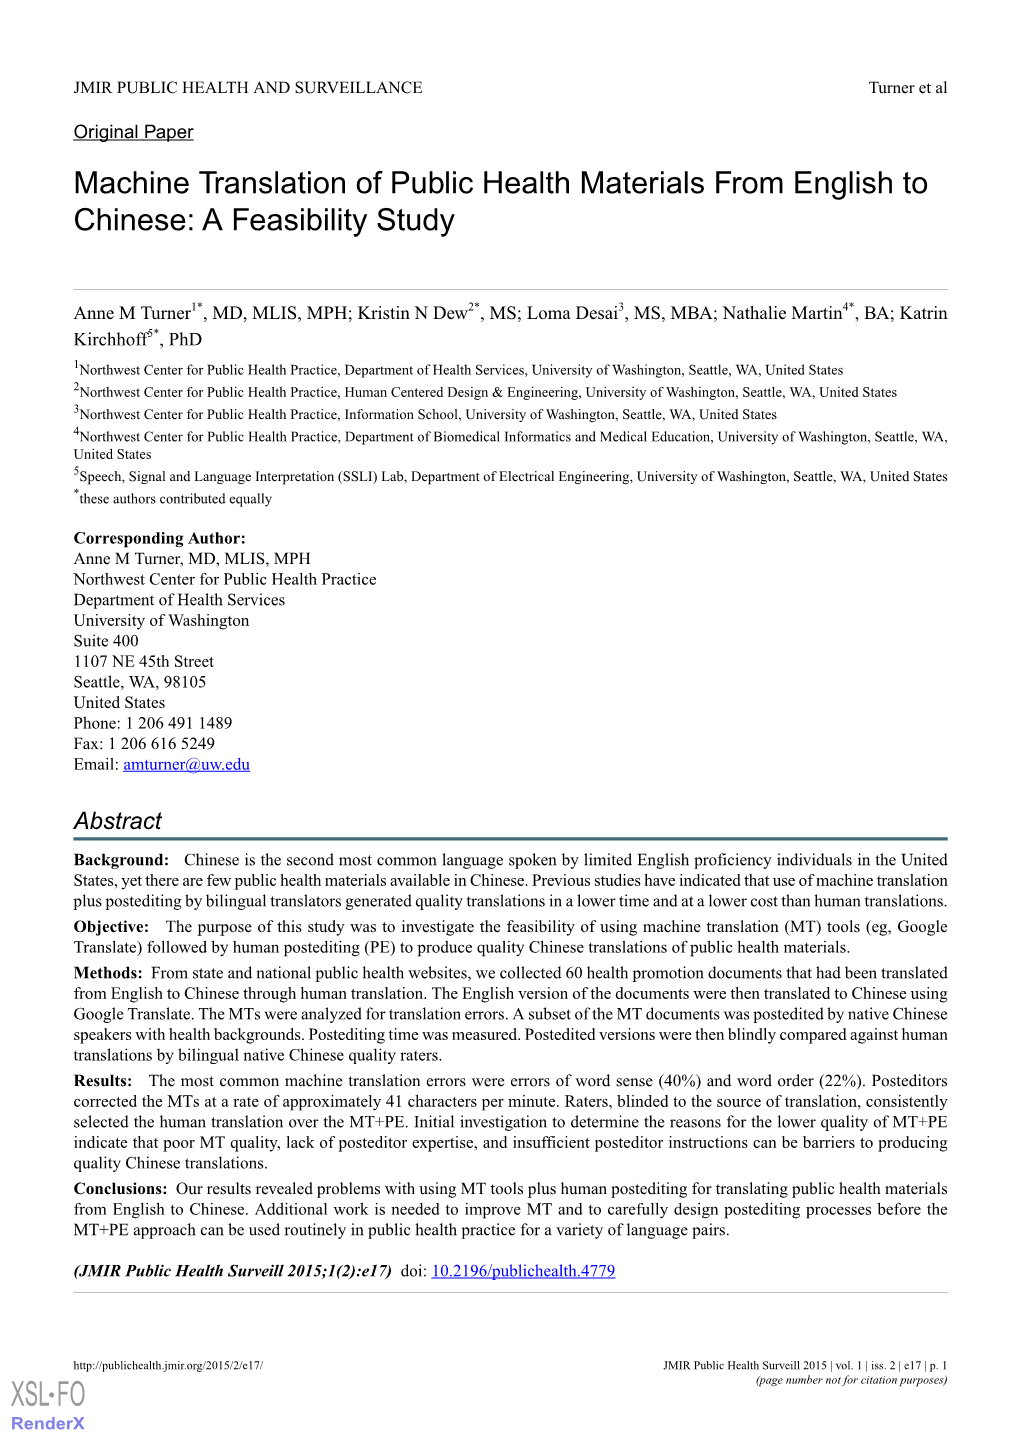 Machine Translation of Public Health Materials from English to Chinese: a Feasibility Study